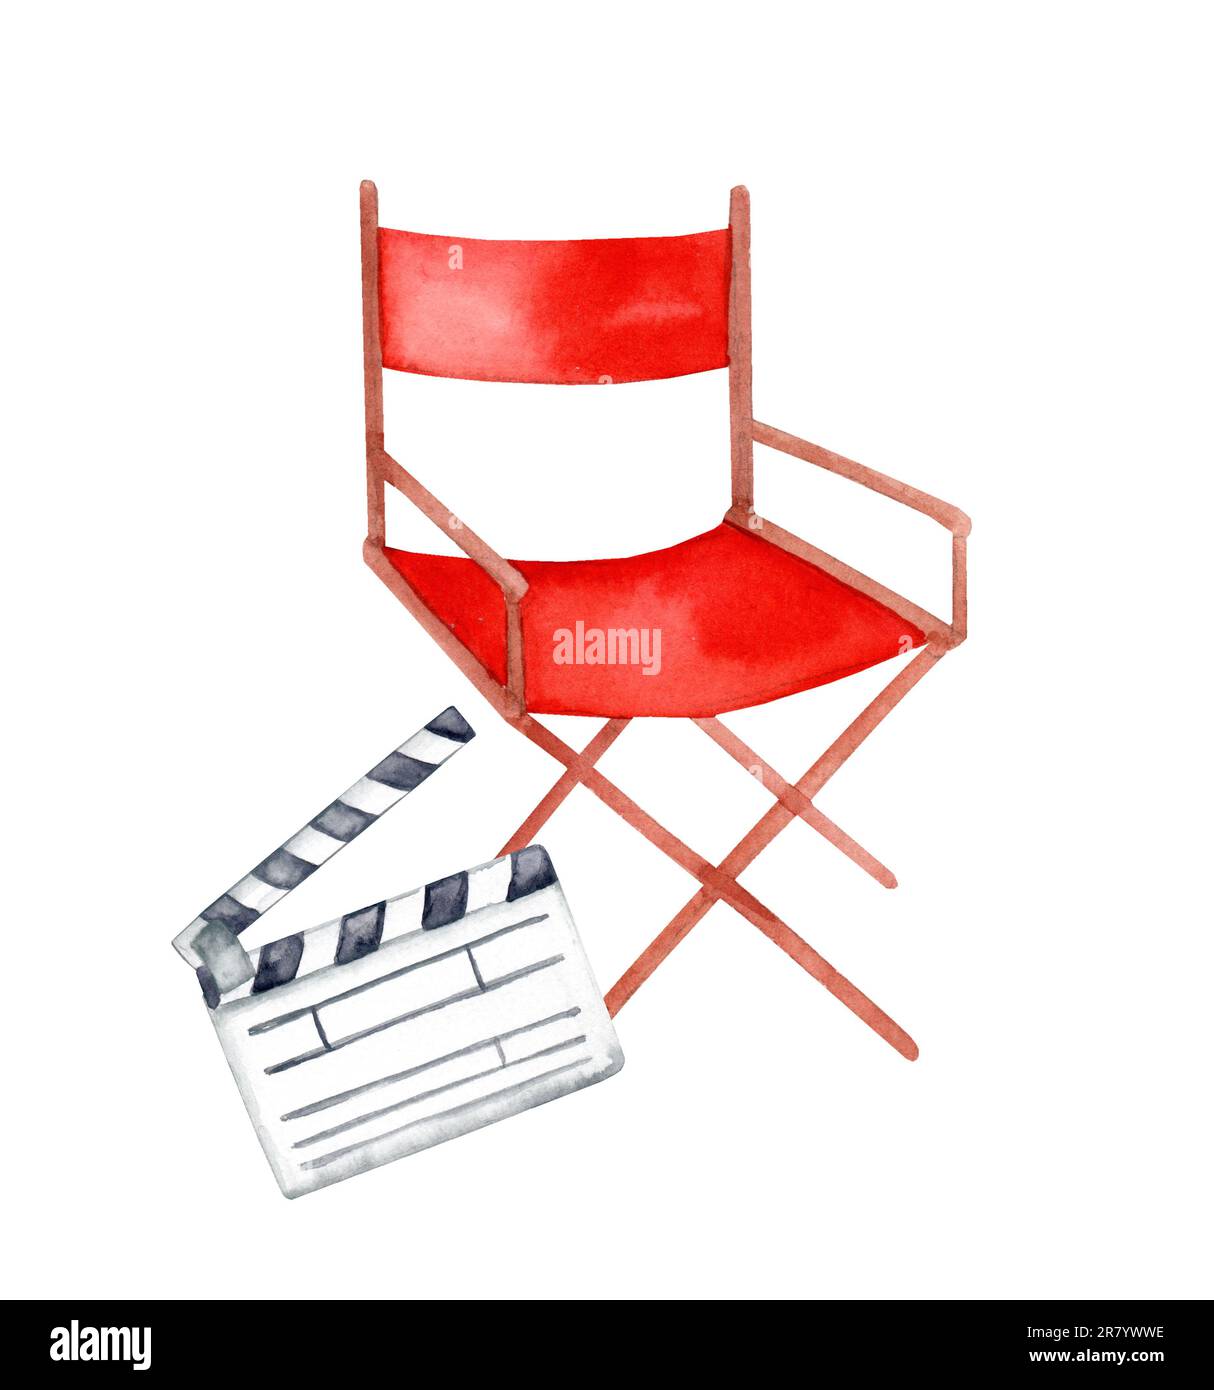 Director's chair and movie clapperboard. Film set. Watercolor hand drawn illustration Stock Photo